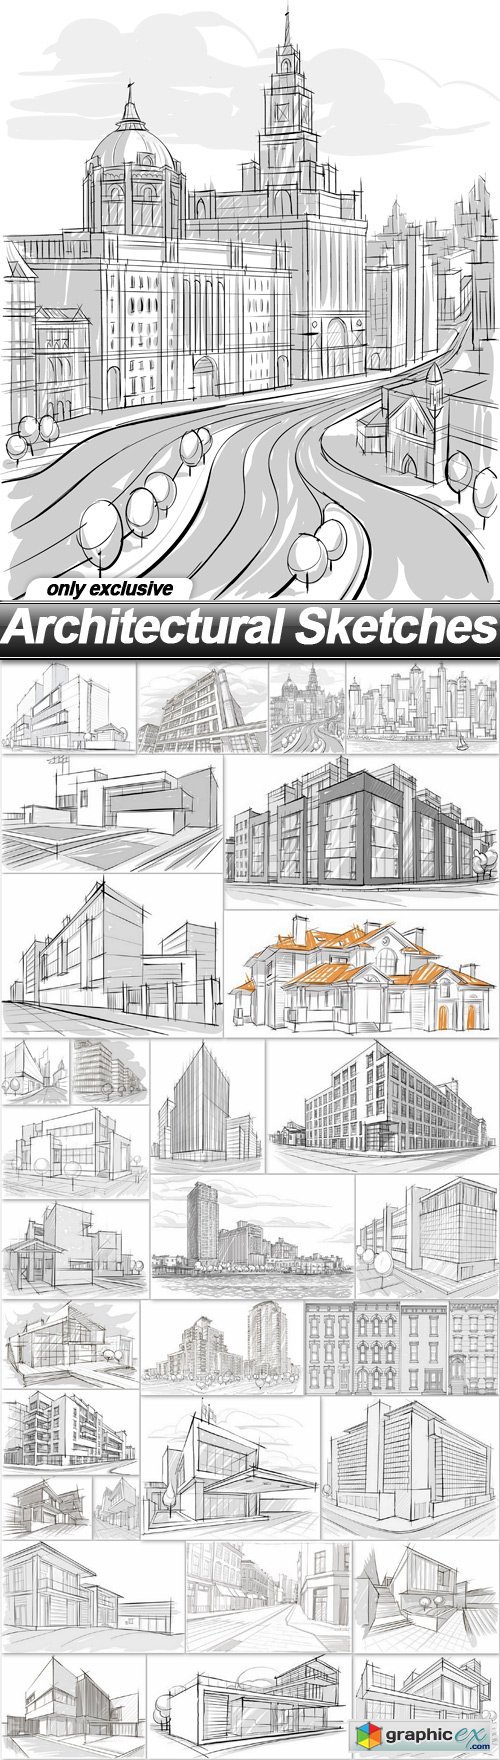 Architectural Sketches - 30 EPS